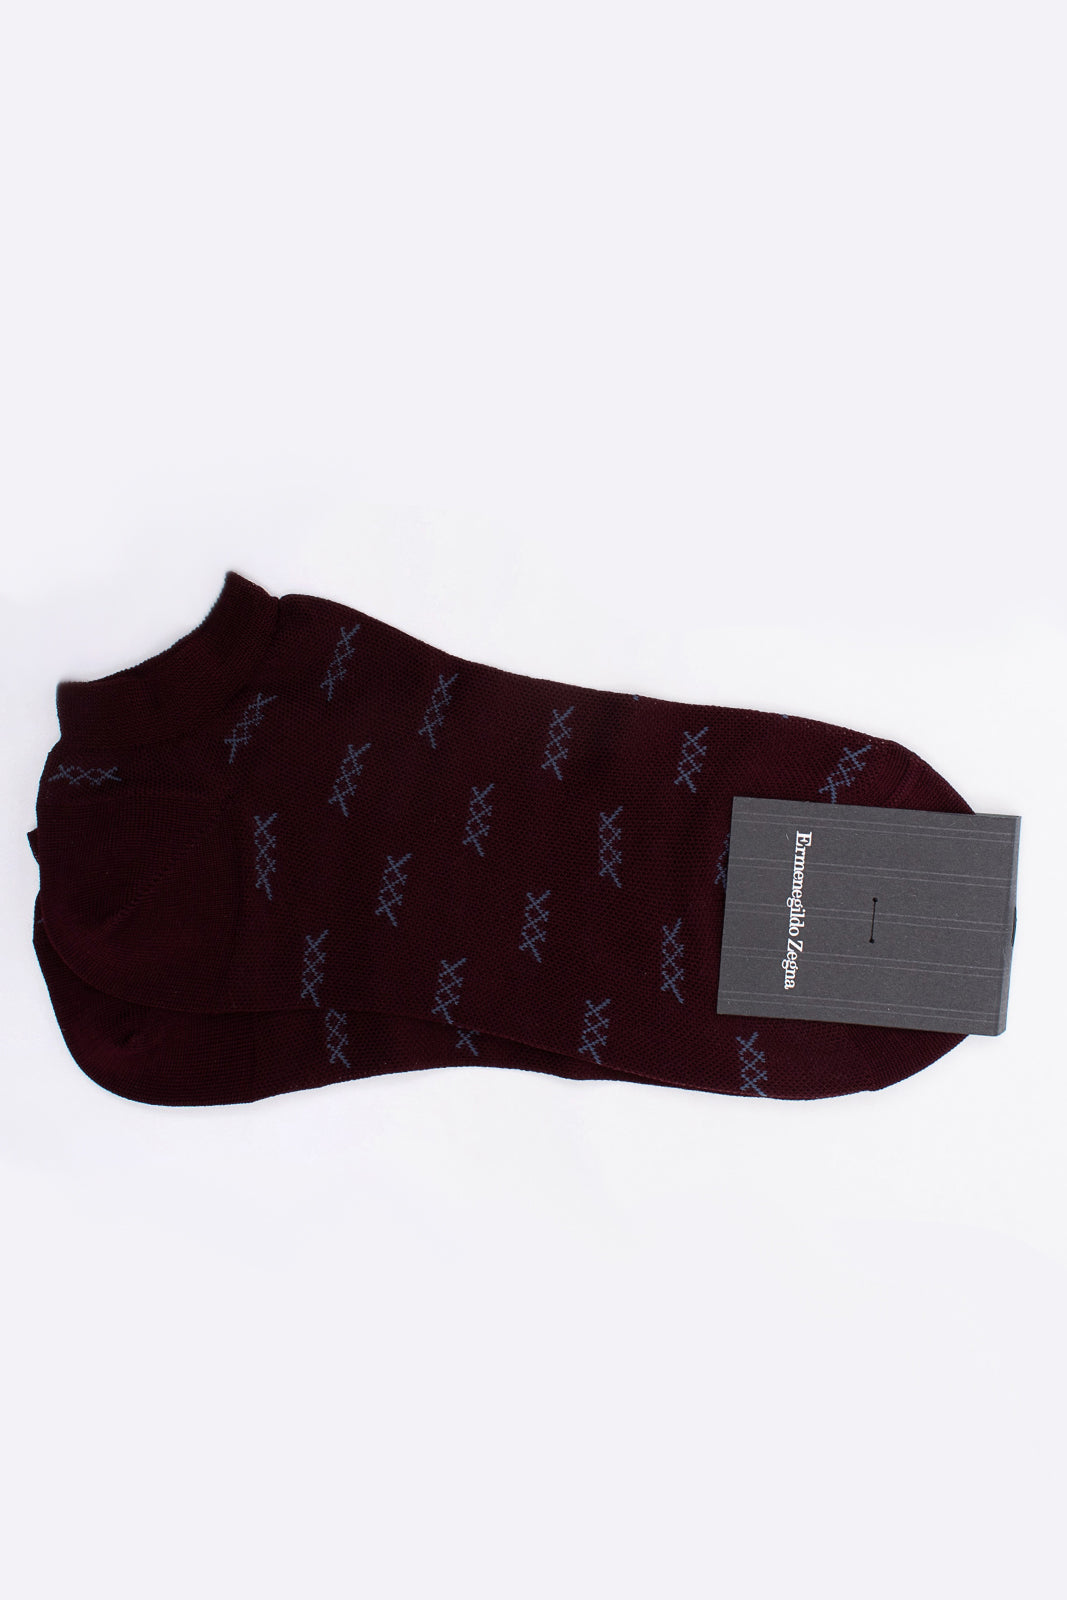 RRP €23 ZEGNA Sneakers Socks 39-42 UK5-8 US6-9 Iconic Triple X Made in Italy gallery main photo